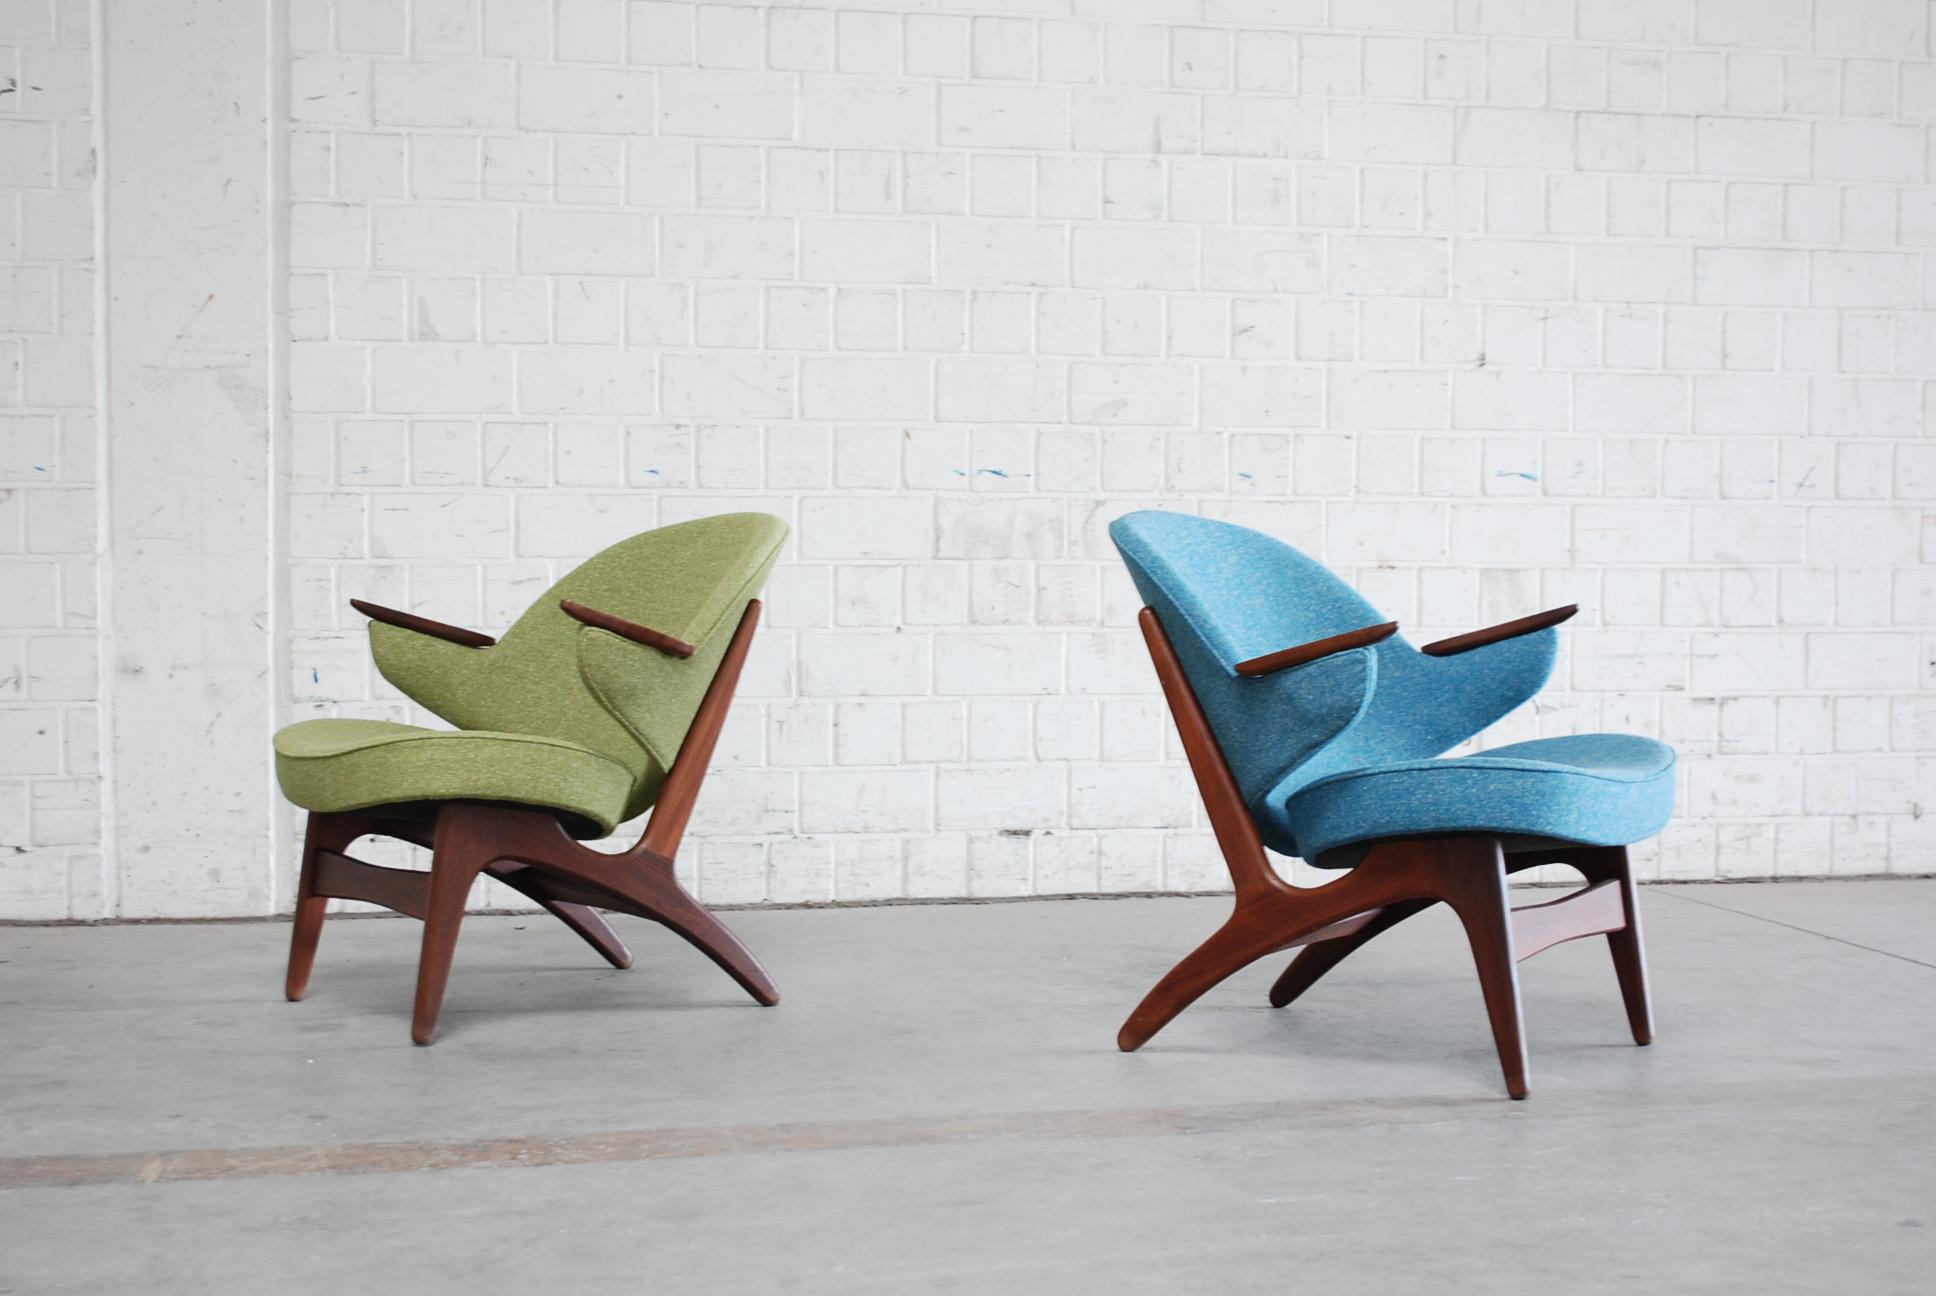 A pair of easy chairs in petrol and green in teak wood.
Design Carl Edward Matthes.
The chair was completely restored and upholstered  in 2 different colors that matches well together.Green and petrol.
The fabric is made of a high quality hemp